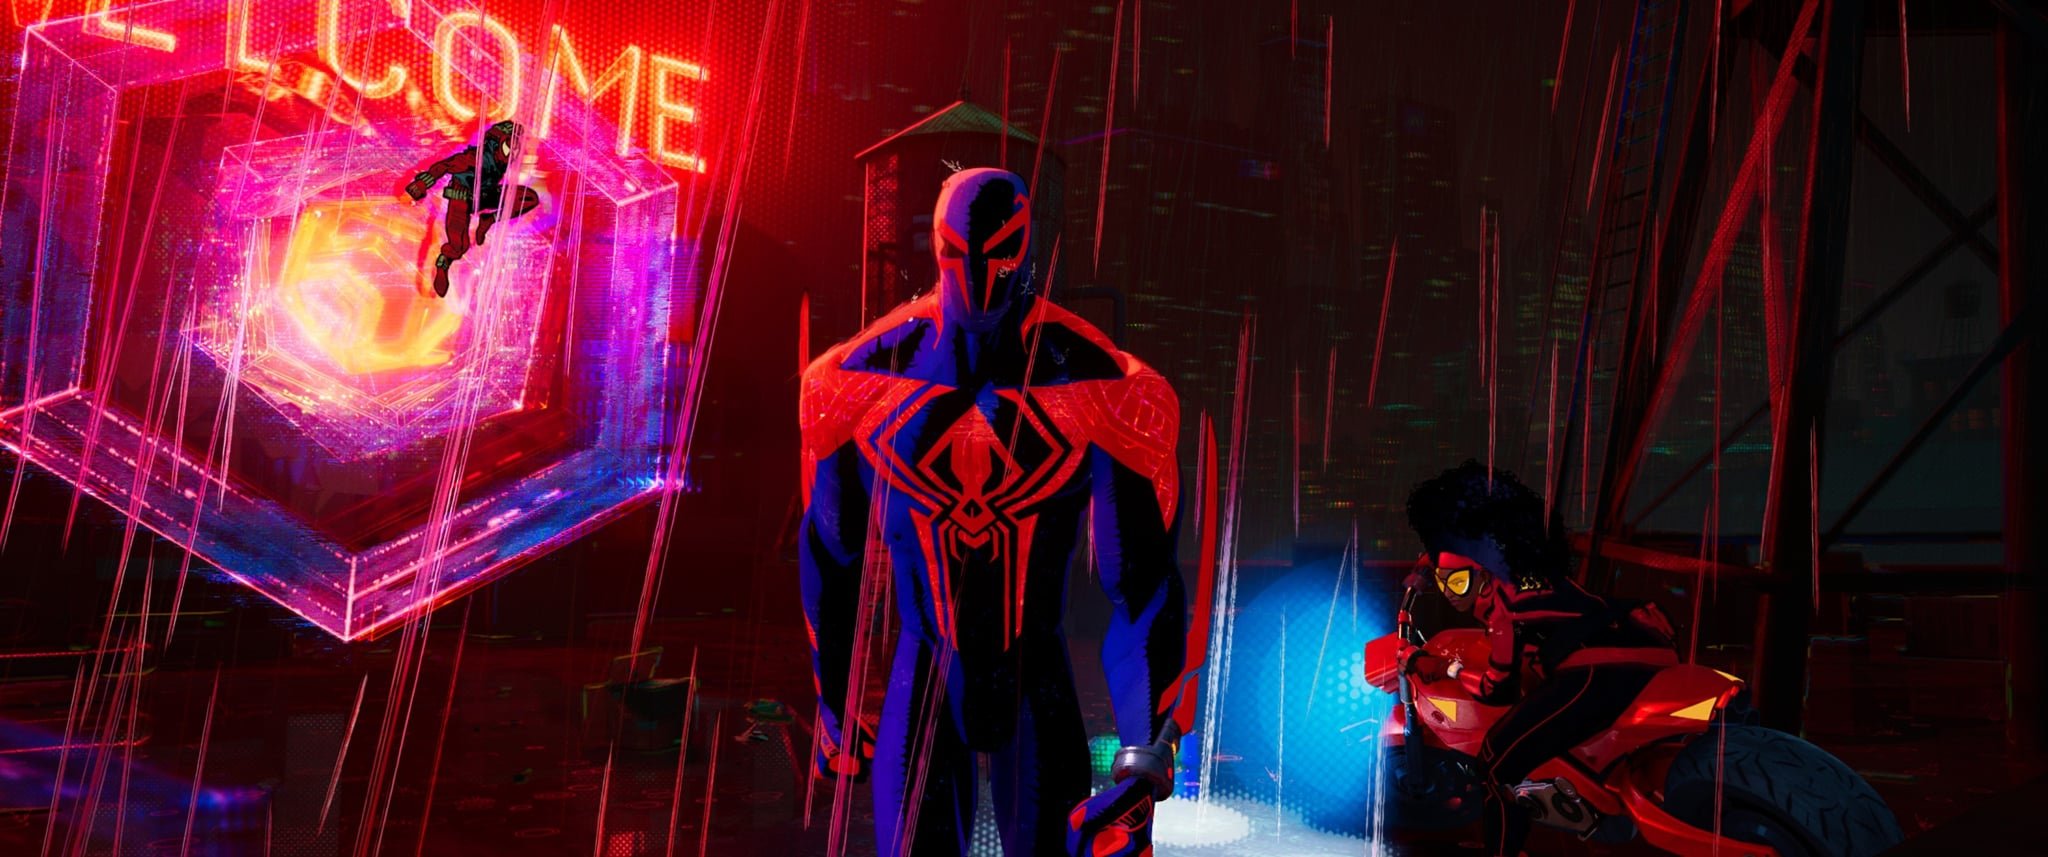 Oscar Isaac As Spider Man 2099 Miguel O'Hara. All The Best Celebrity Cameos You Might Have Missed In Across The Spider Verse